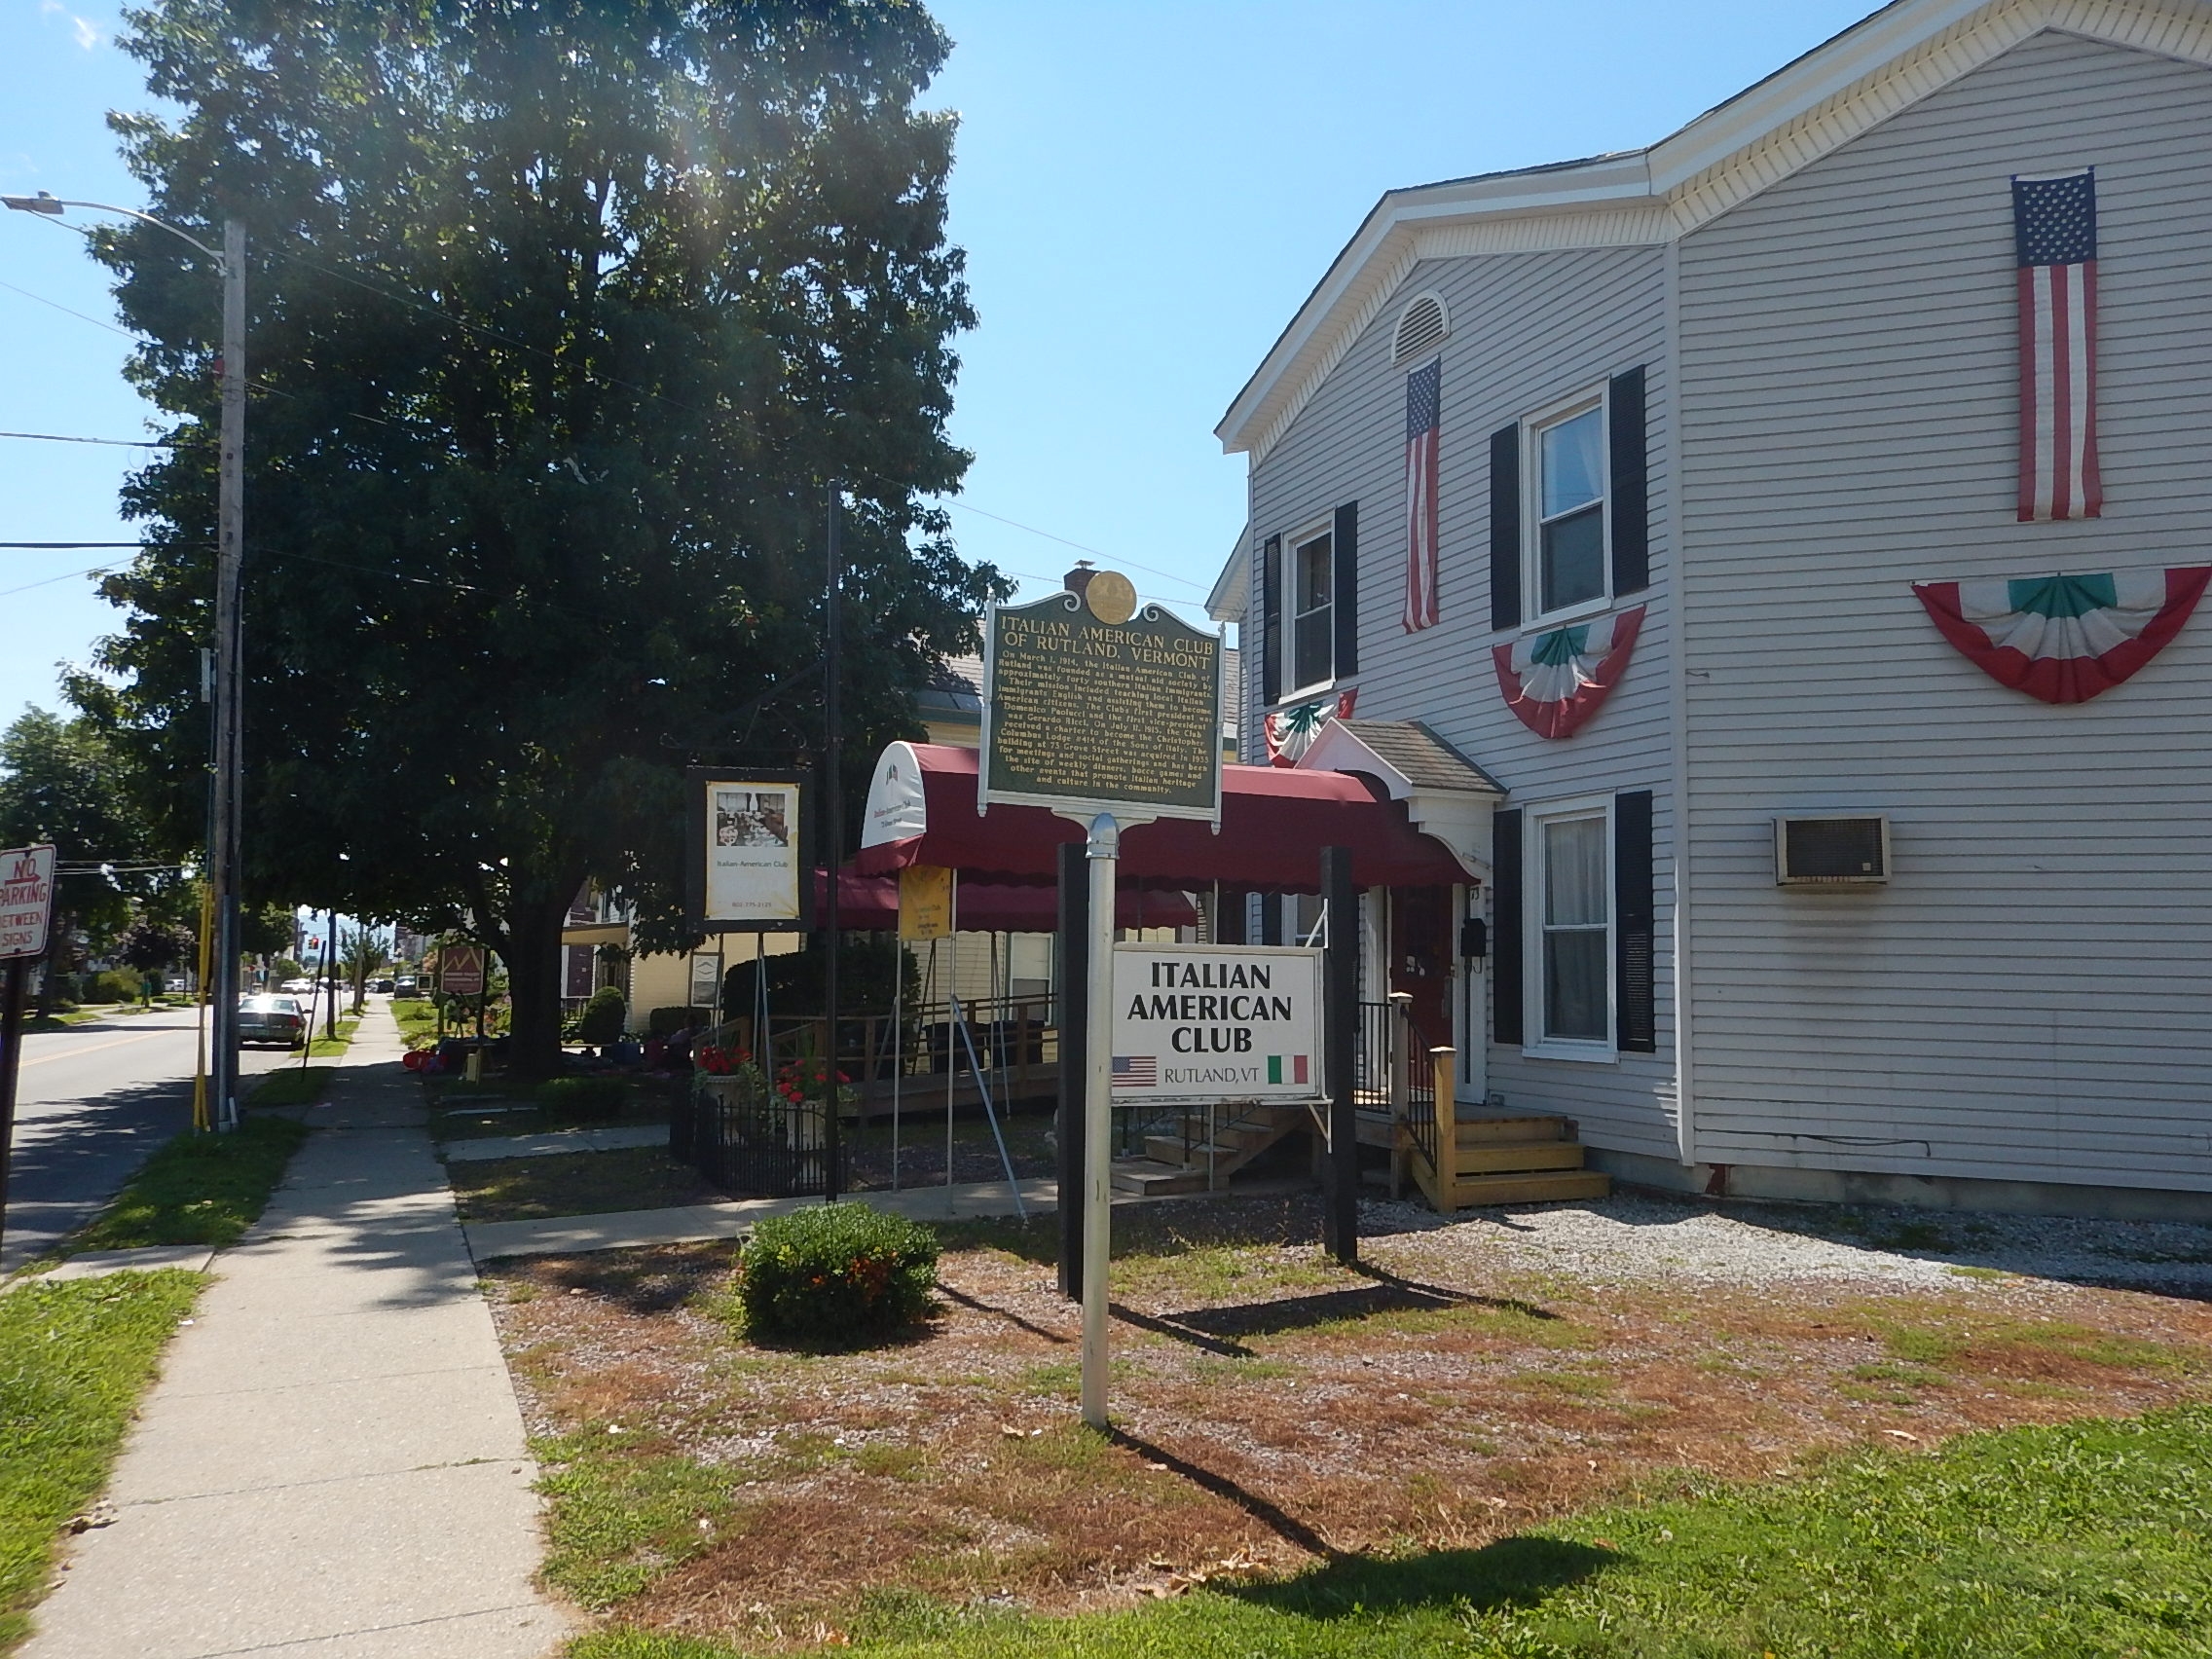 Wideview of Italian American Club of Rutland, Vermont Marker